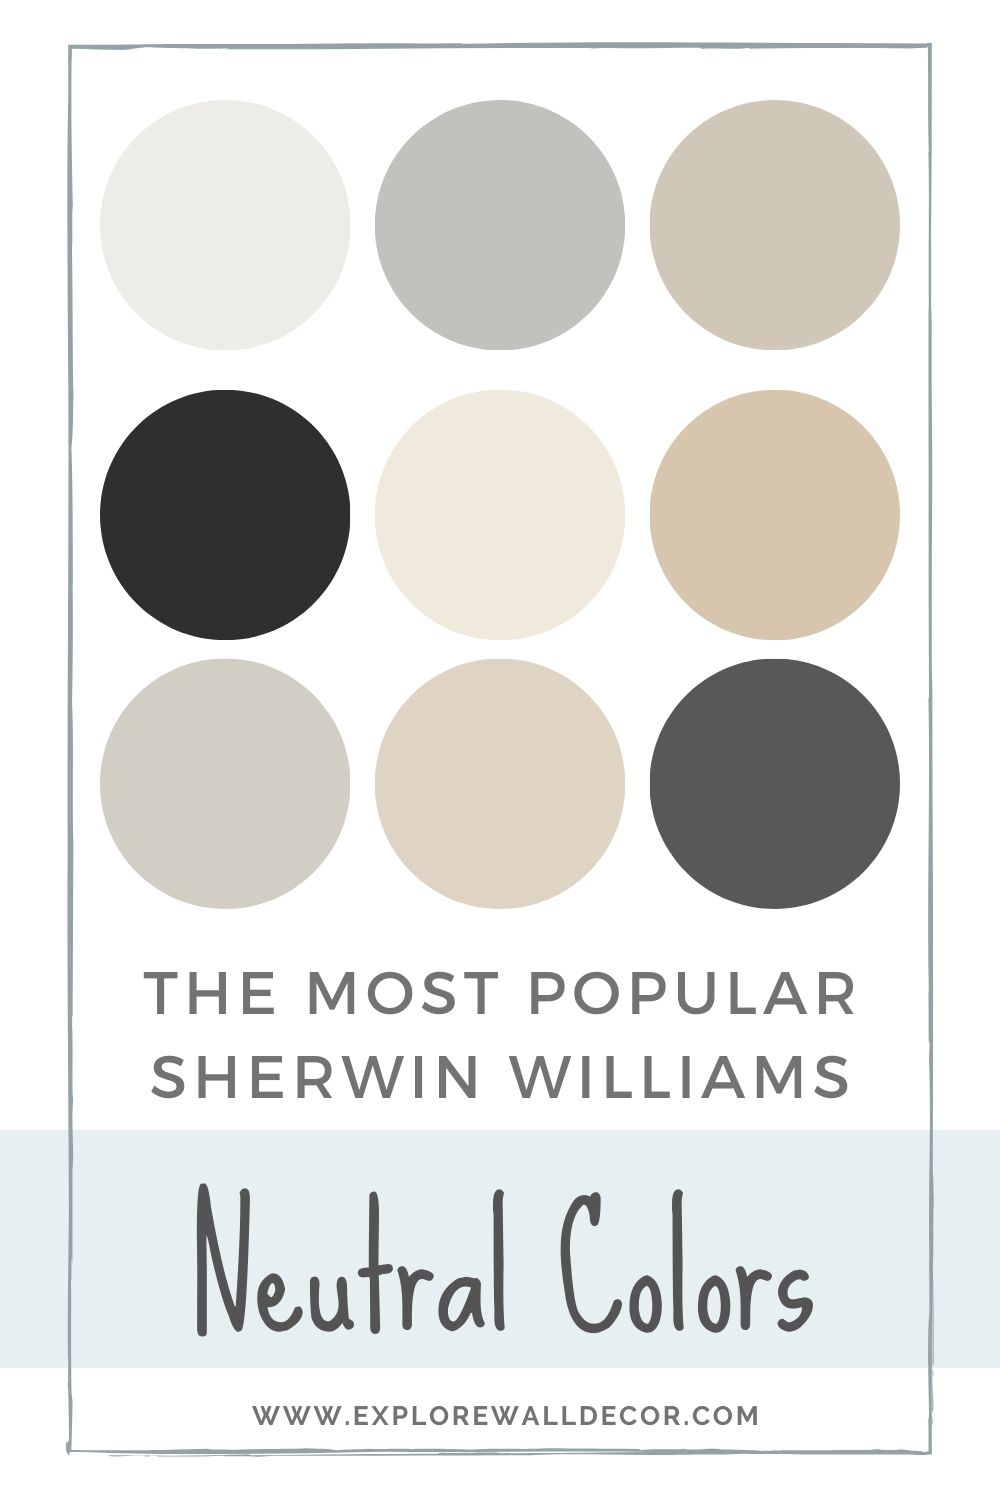 What Are The Most Popular Sherwin Williams Neutral Colors 2022